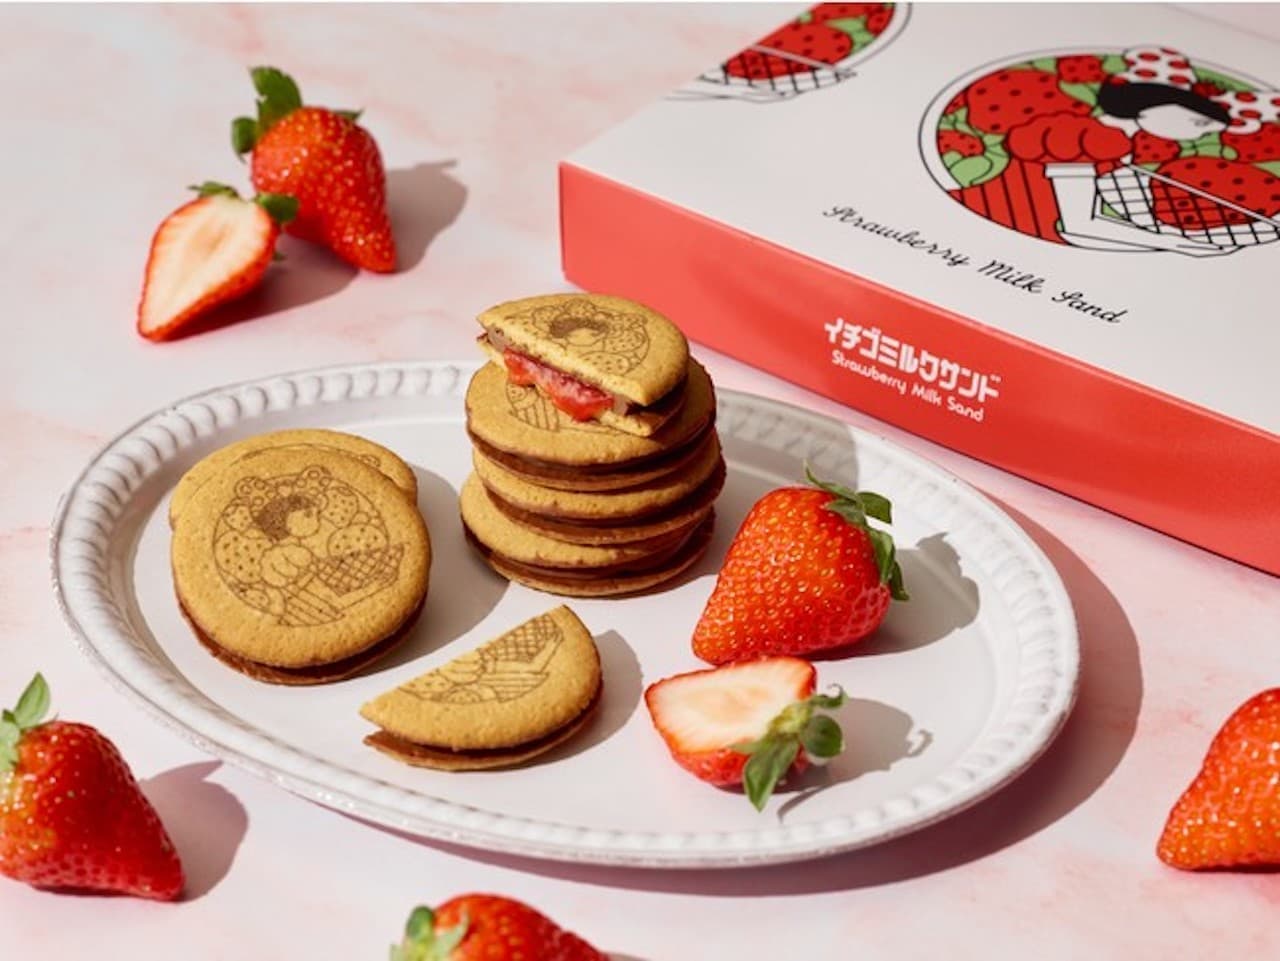 "Strawberry Shop by FRANCAIS" opens for a limited time at Abeno Harukas Kintetsu Main Store